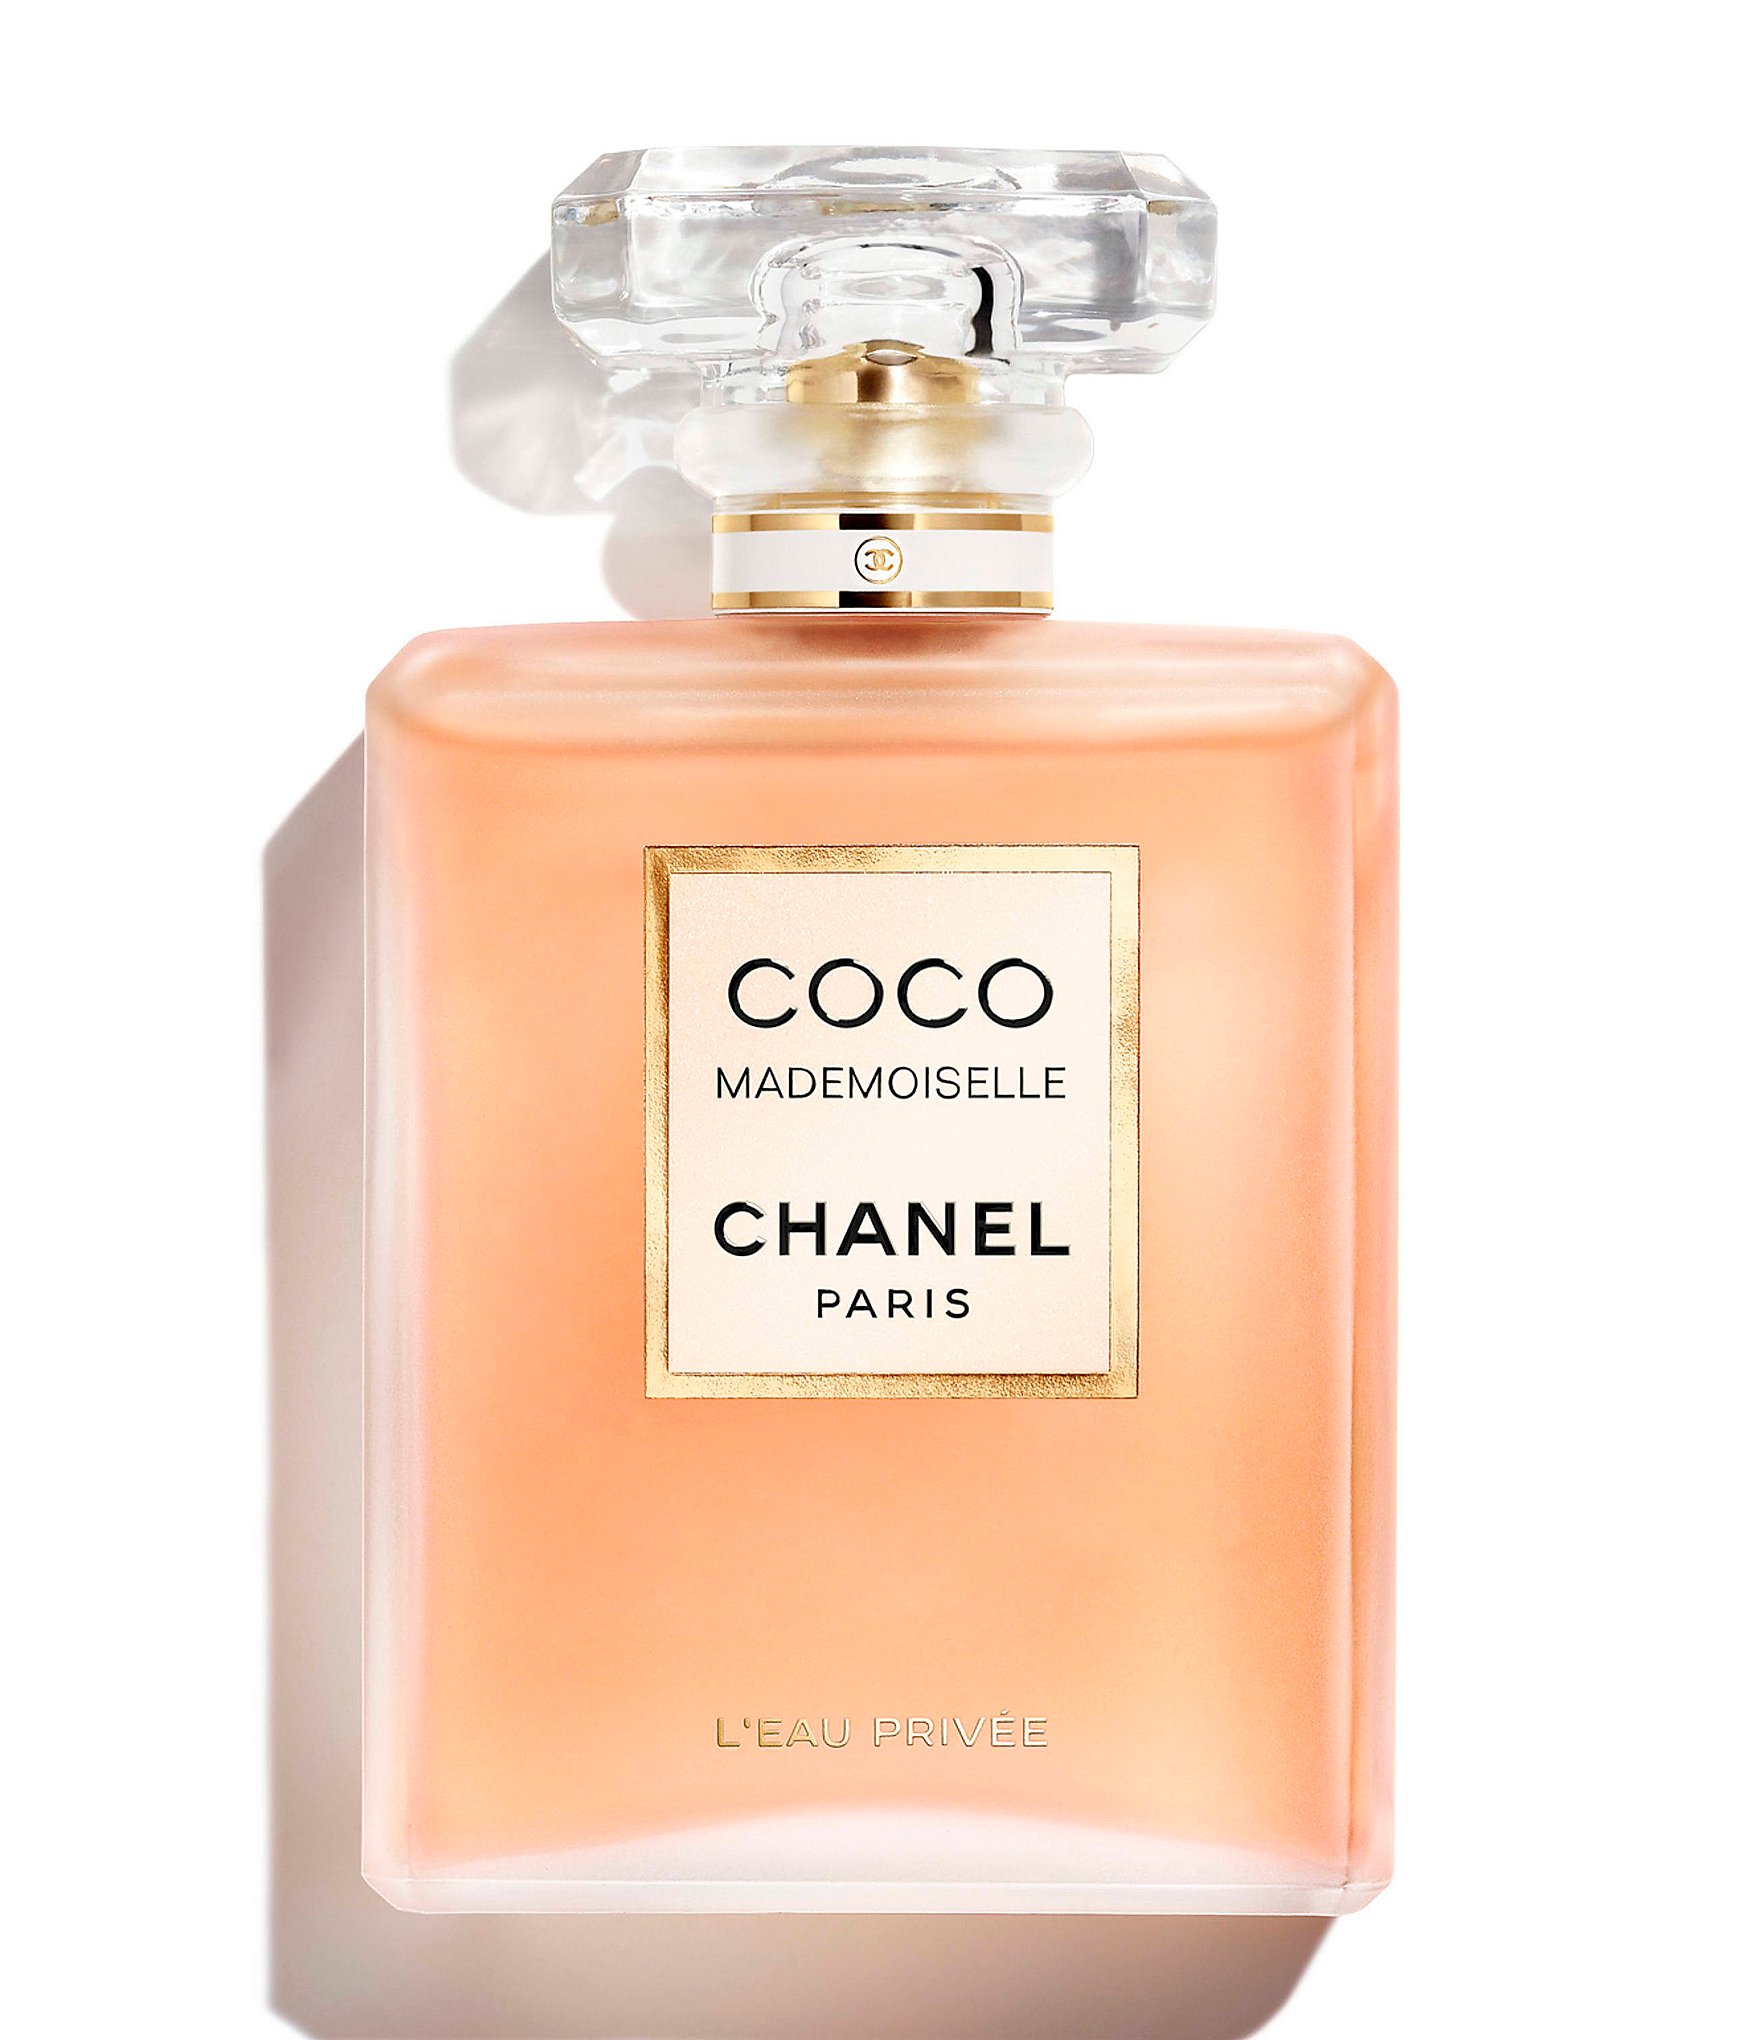 CHANEL - Shop the sensual fragrance of COCO MADEMOISELLE this holiday.  chanel.com/-cocomademoiselle-us